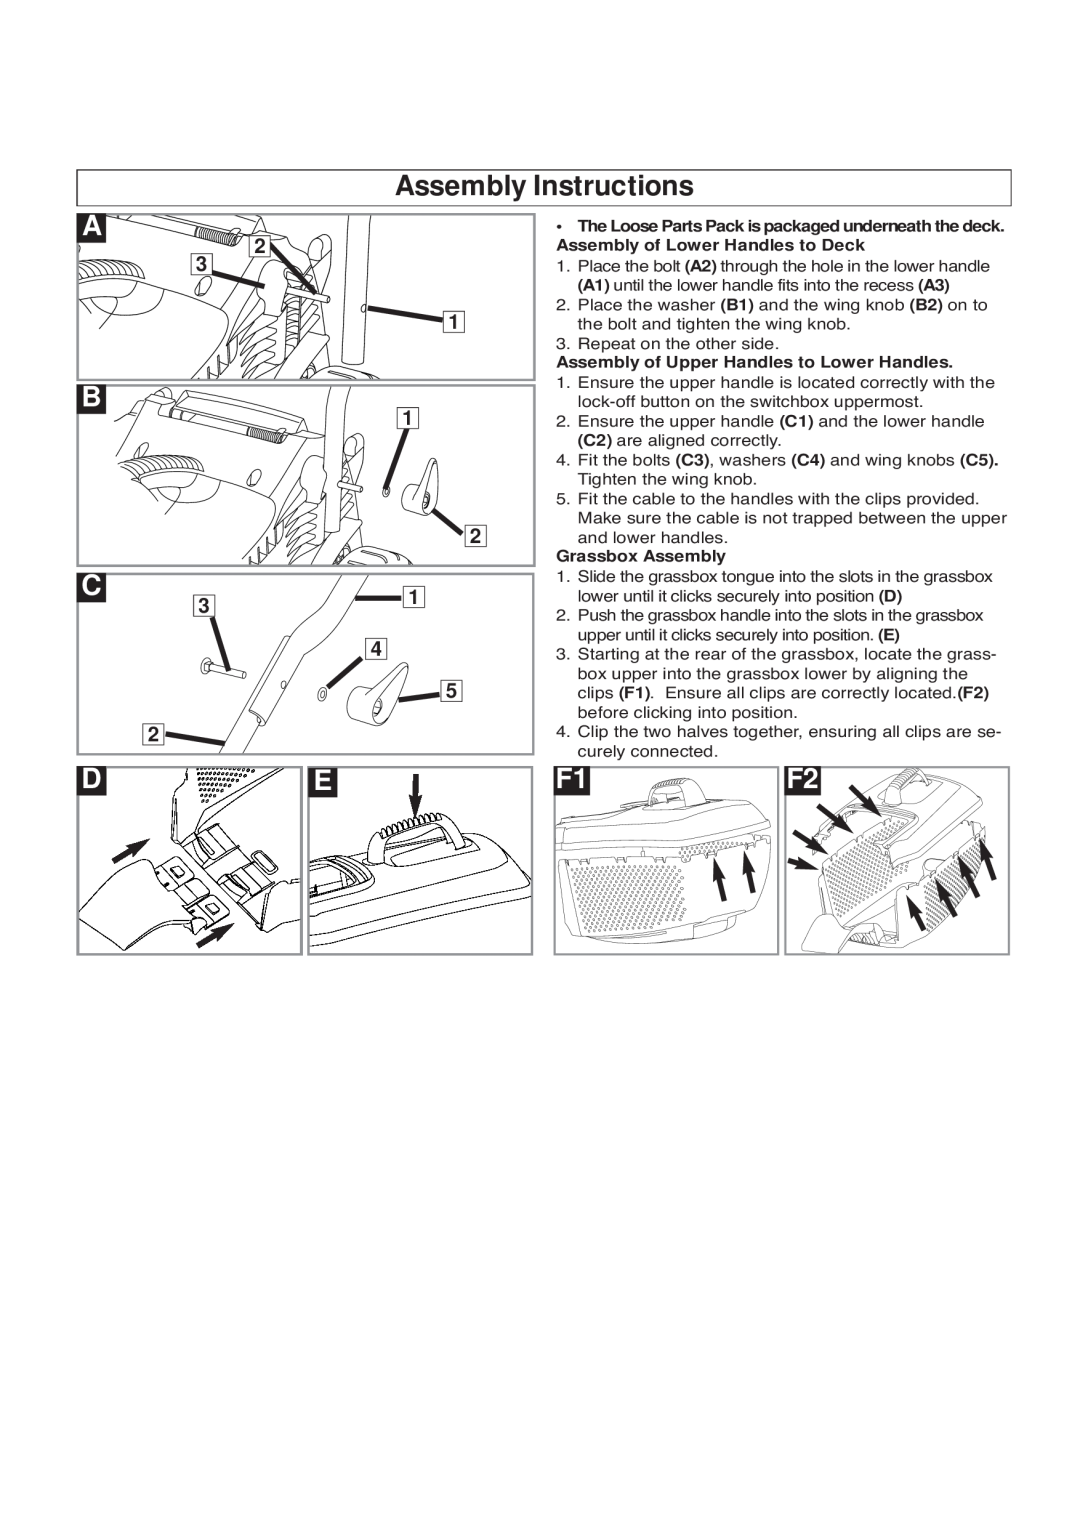 Flymo VM032, VTR32, RM032, EM032 manual Assembly Instructions, Assembly of Upper Handles to Lower Handles, Grassbox Assembly 